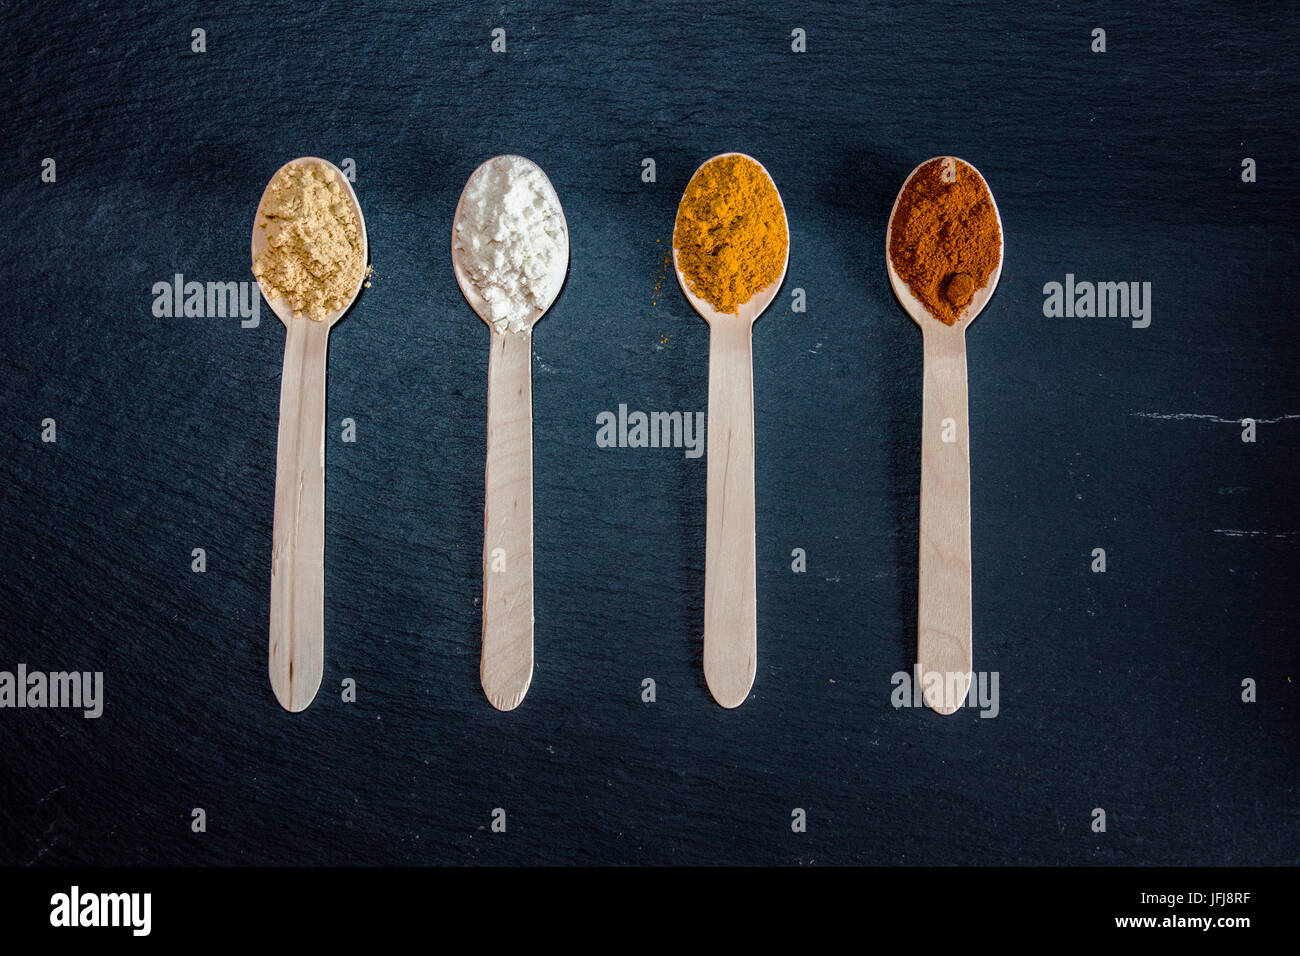 Local spices and aromas of Italian cooking stored in spoons Stock Photo